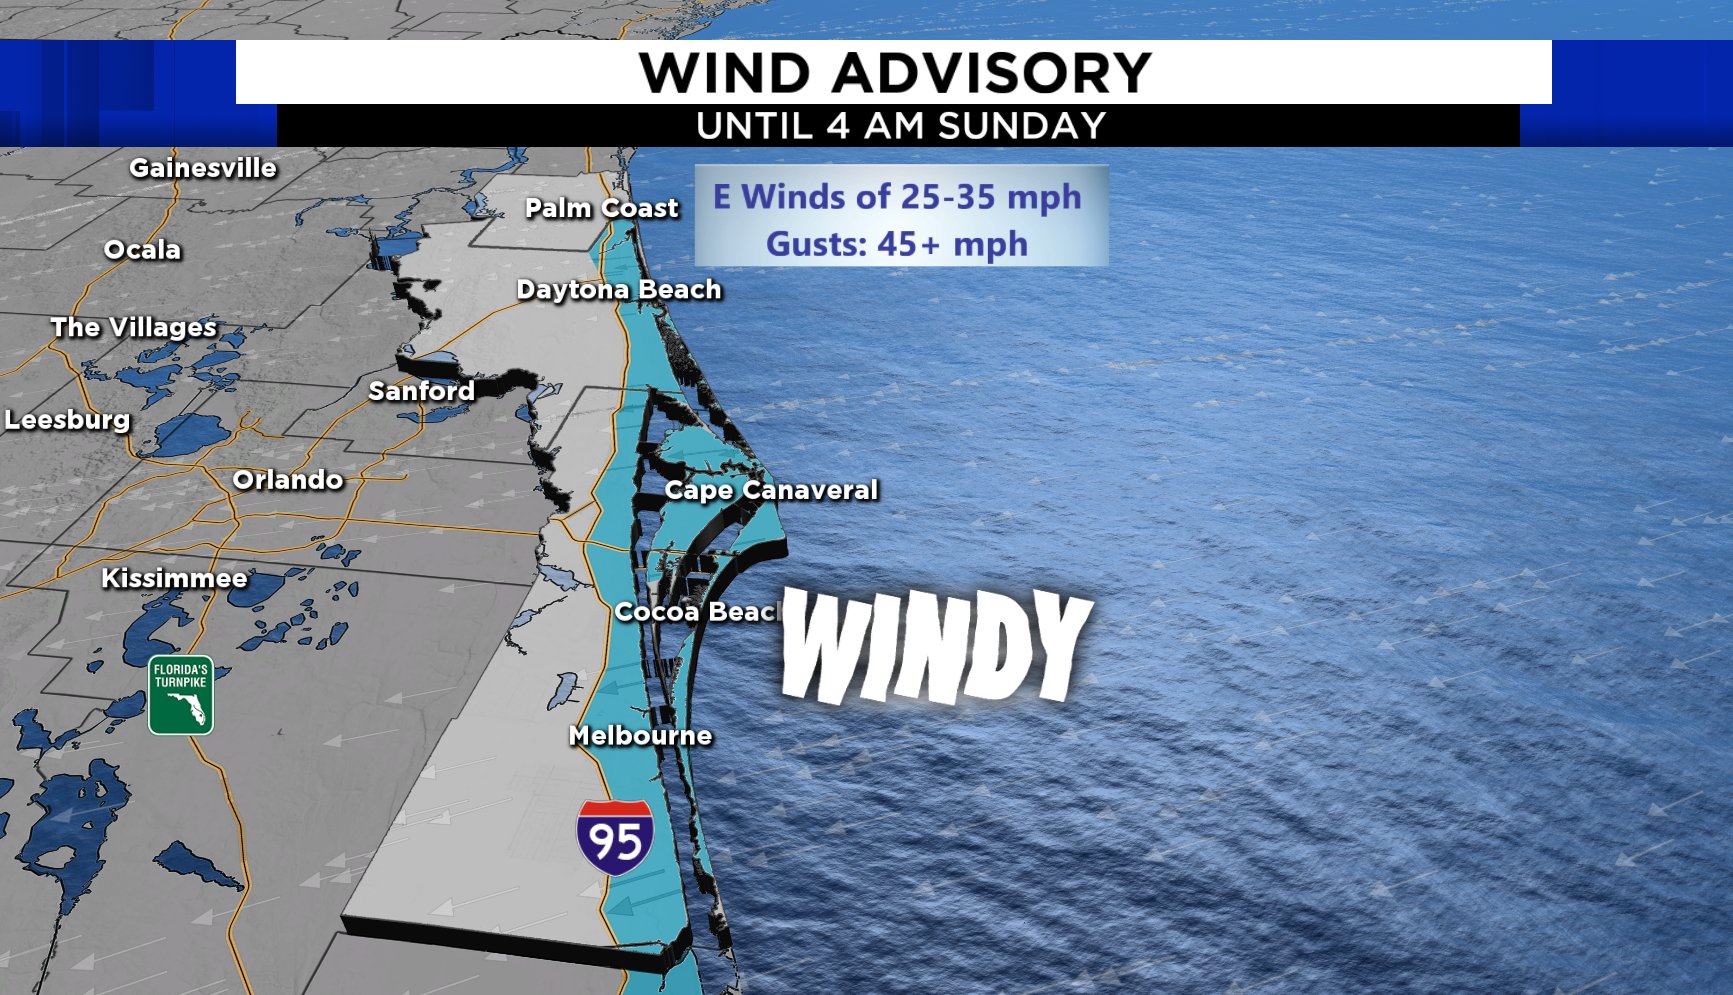 Why has it been so windy in Central Florida all week? Here's the answer